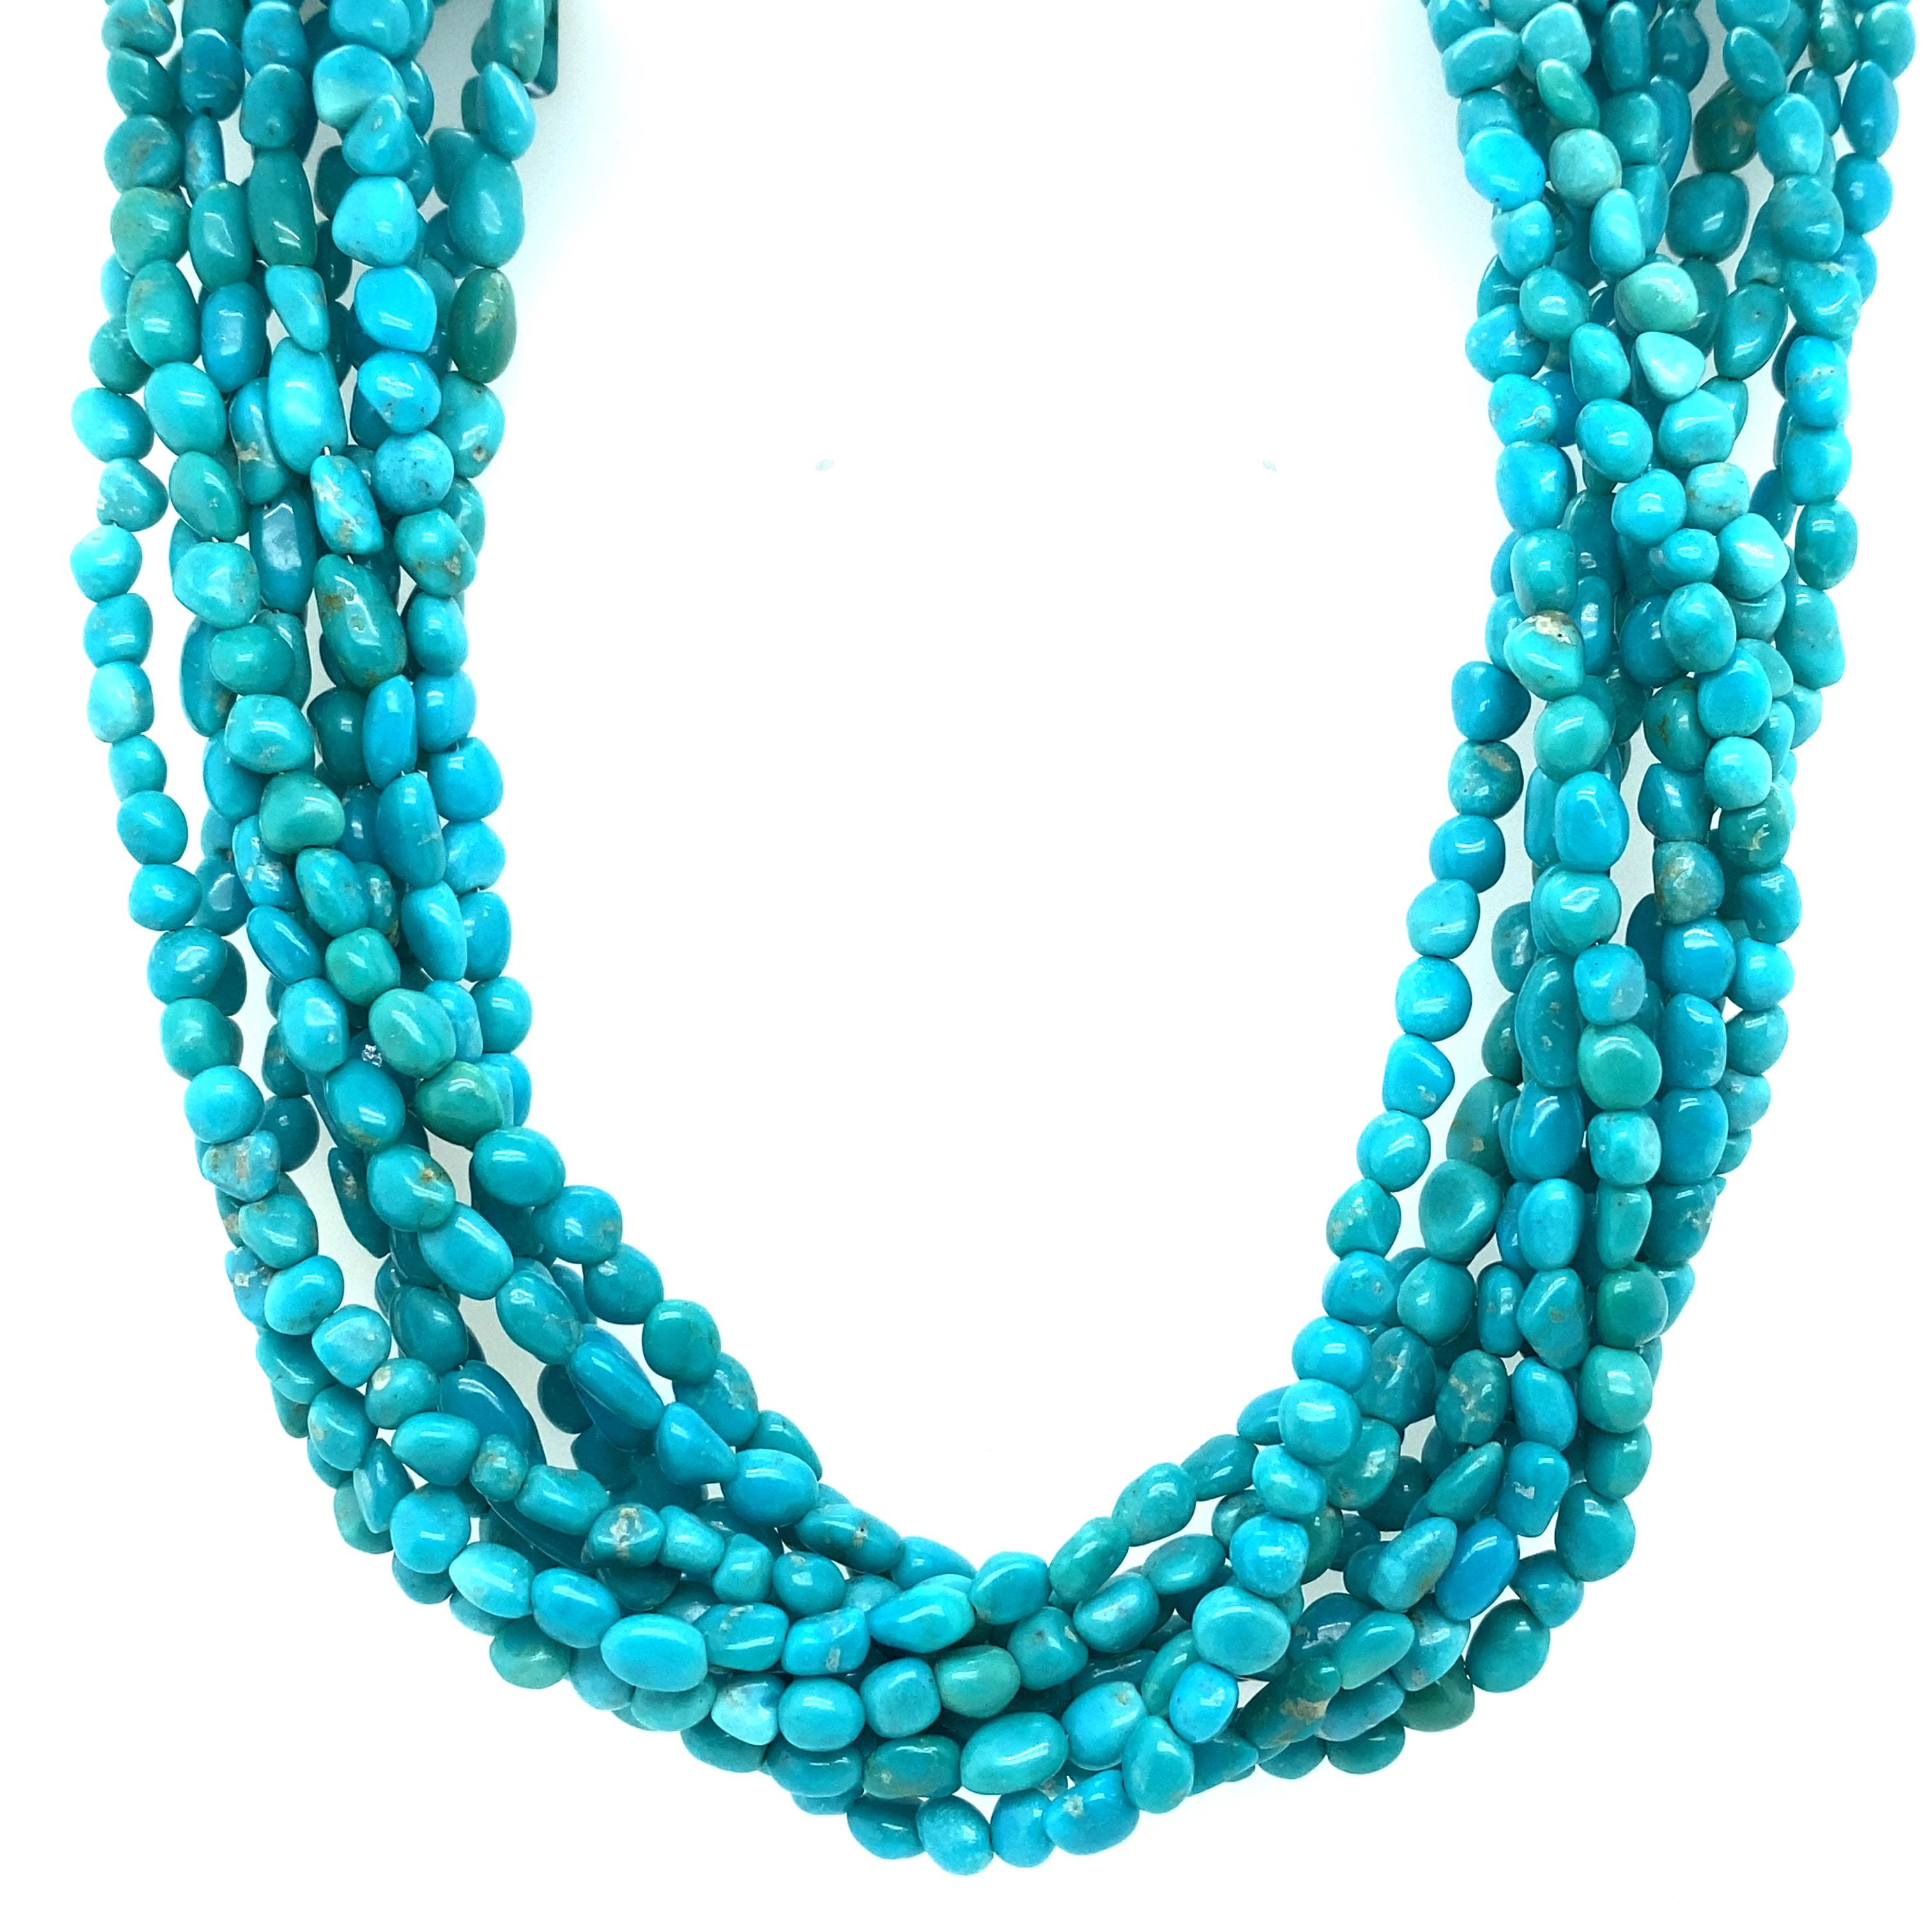 Item Details: This vintage necklace has twisted strands of vibrant turquoise with a sterling silver clasp. It is a gorgeous Southwestern style piece for any collector of turquoise jewelry.

Circa: 1970s
Metal Type: Sterling silver
Size: 22 inch